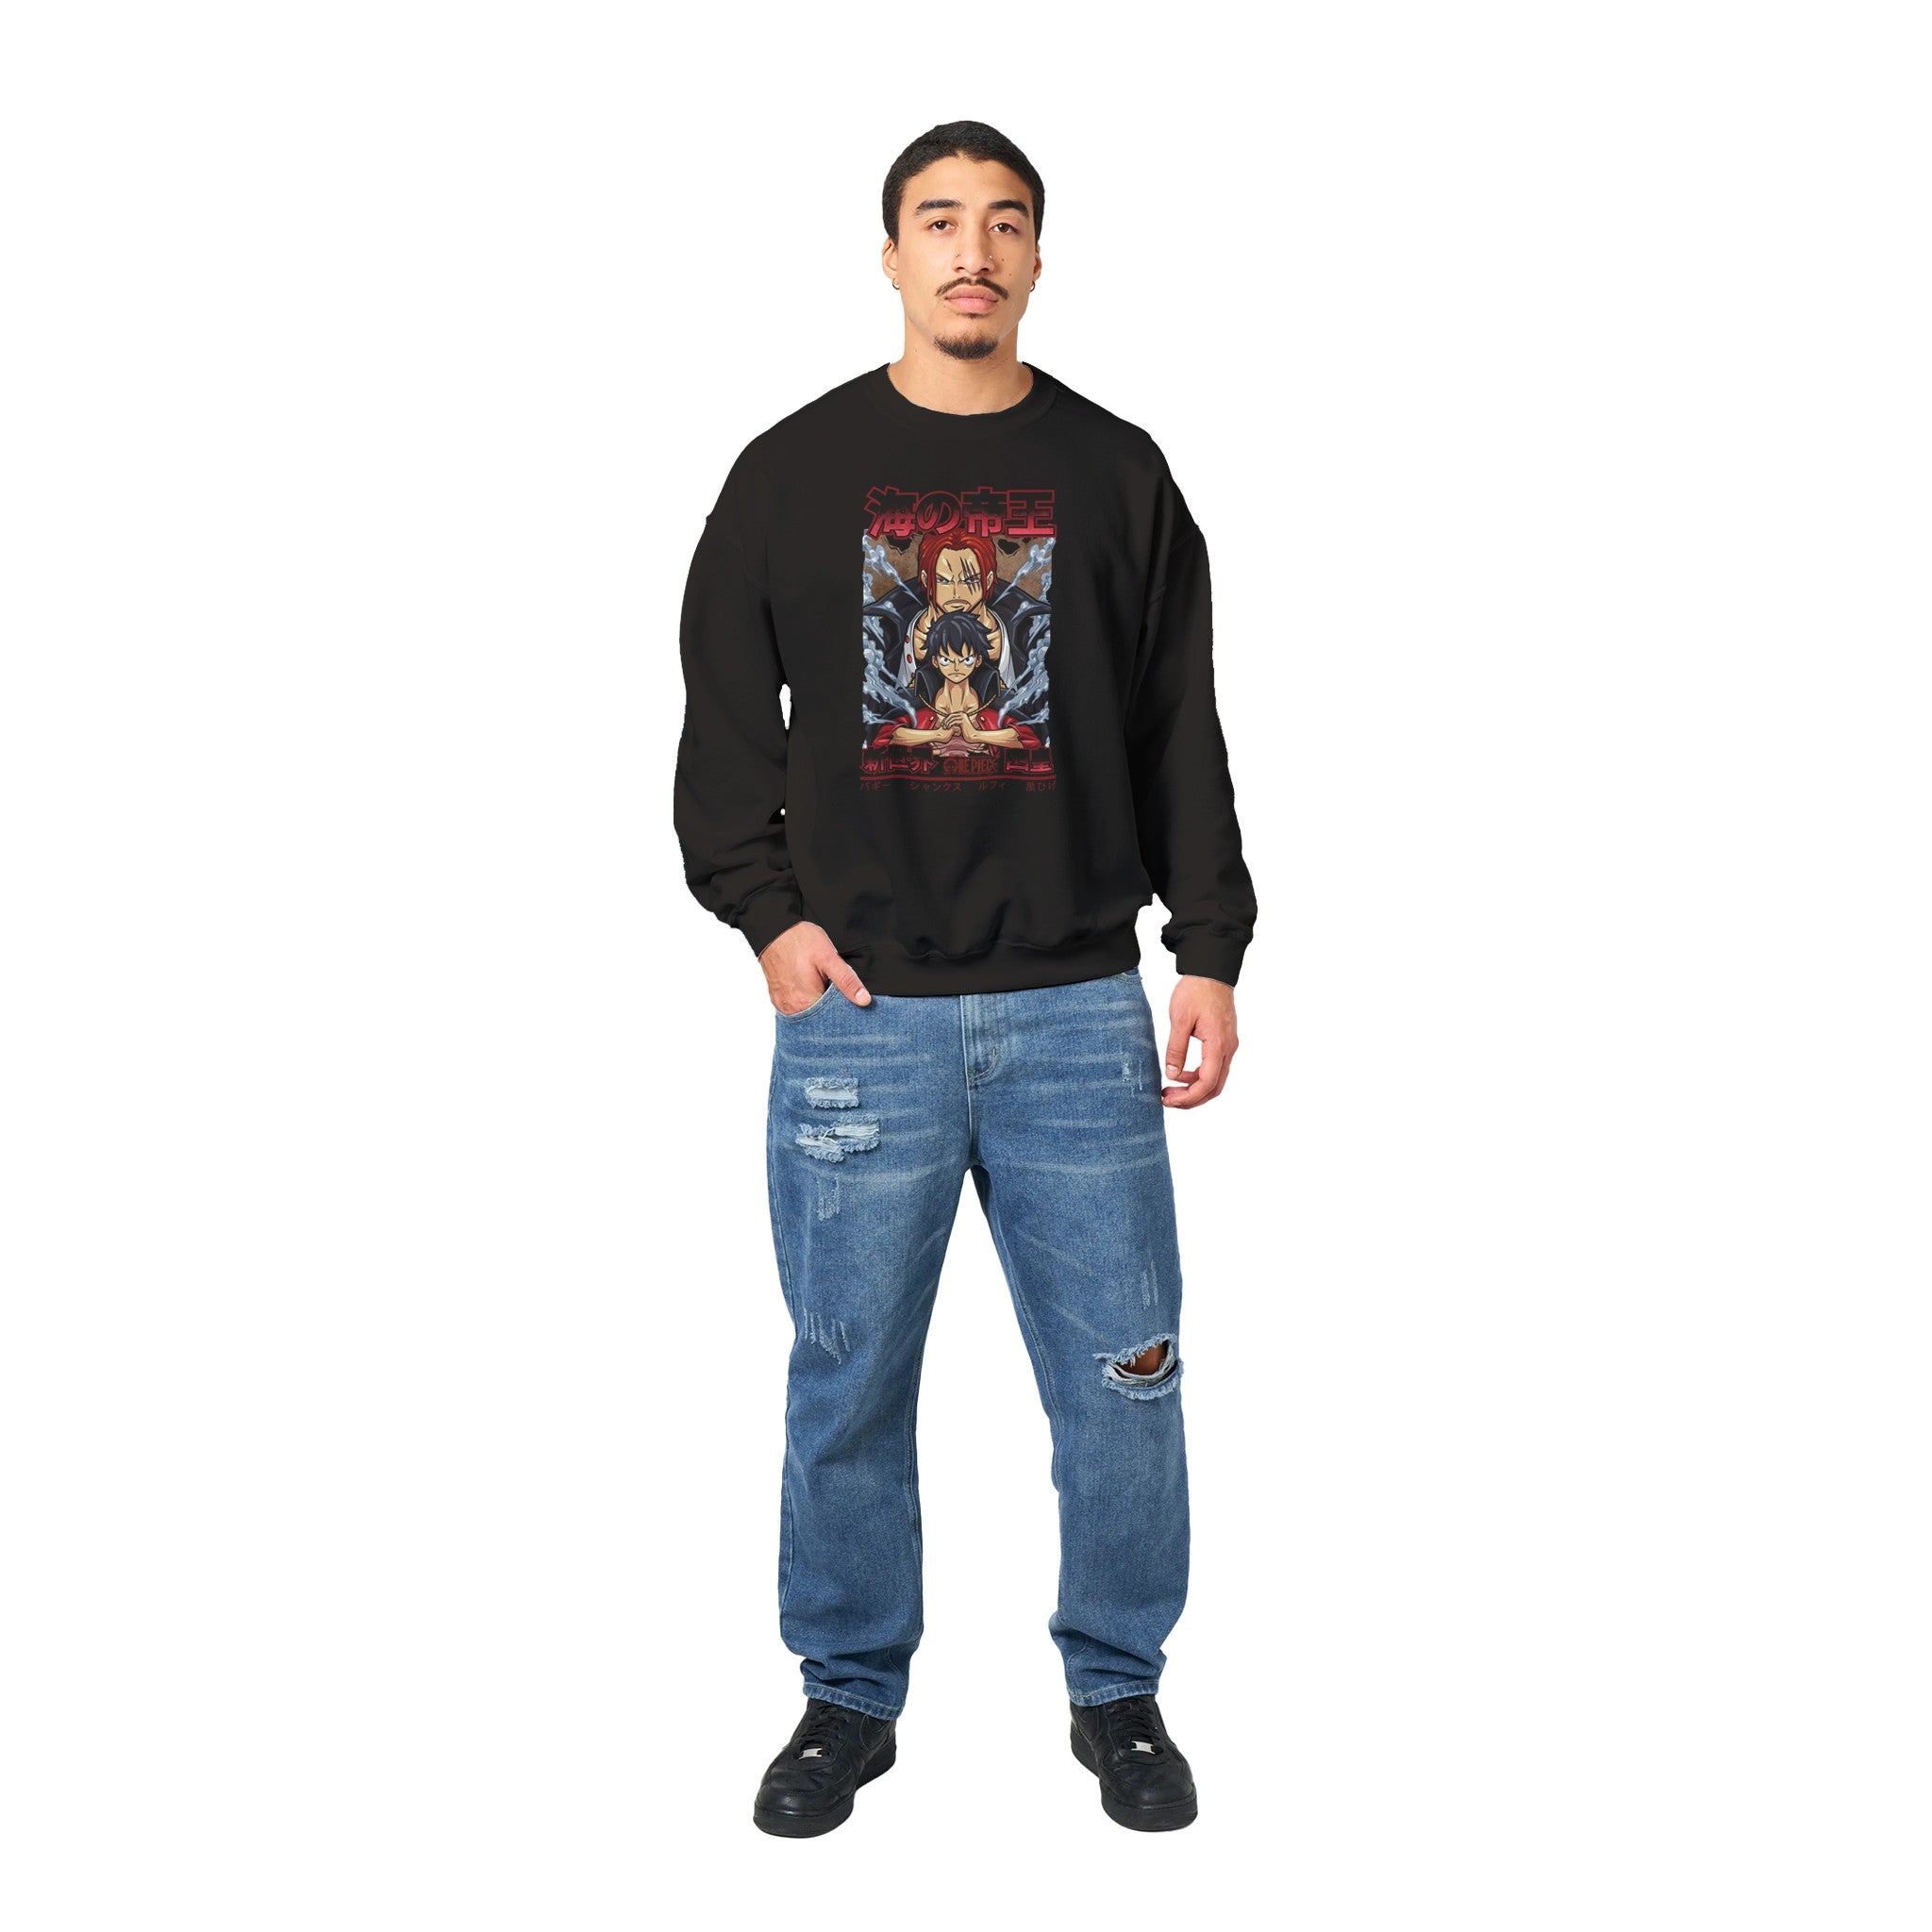 shop and buy One Piece Luffy and Shanks anime clothing sweatshirt/jumper/longsleeve